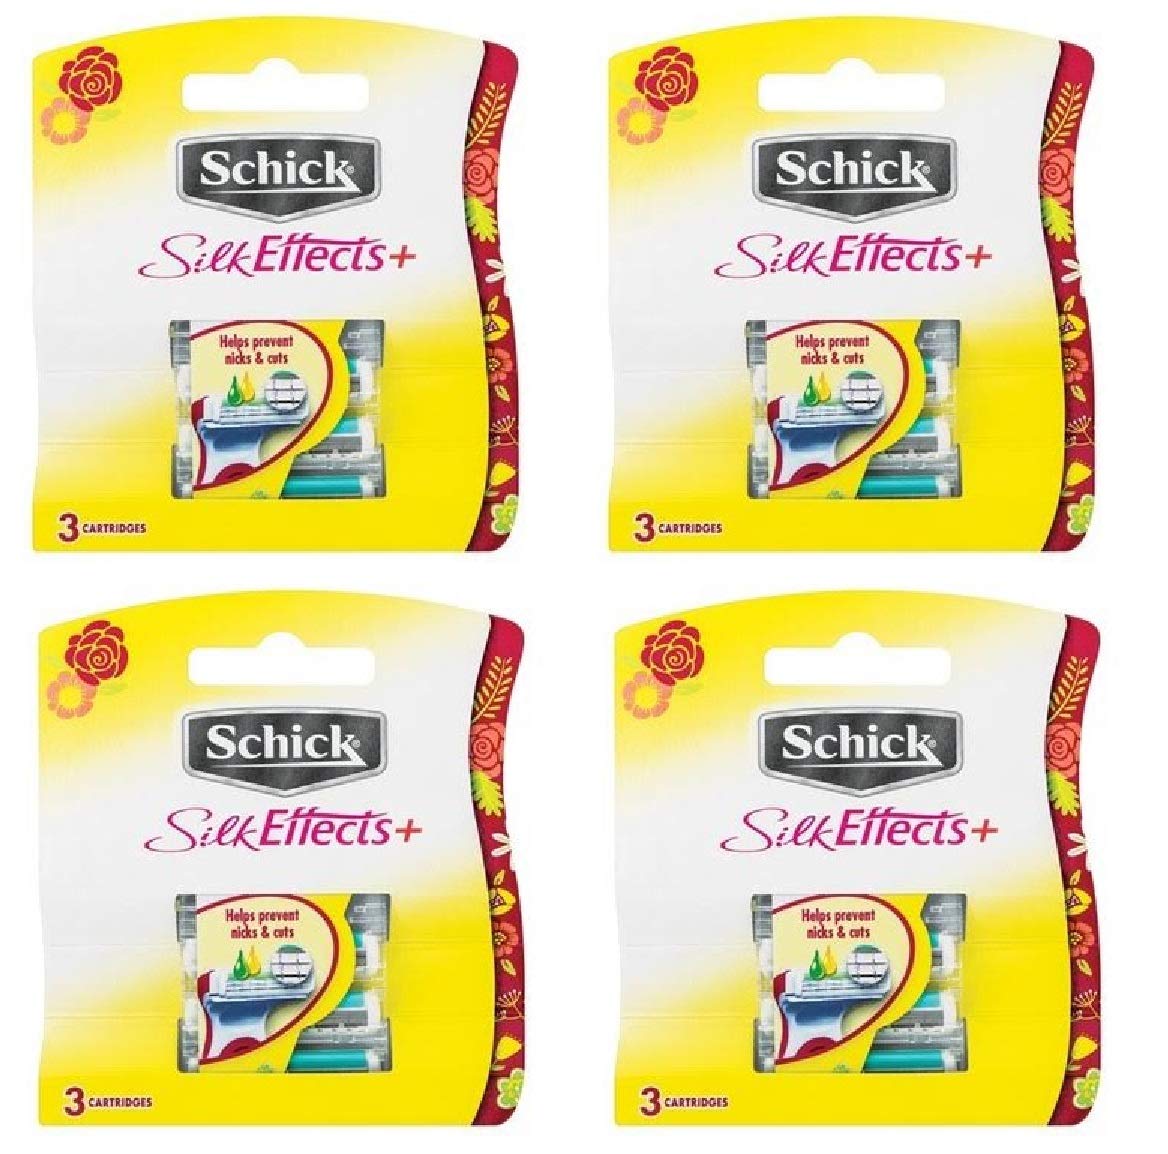 Schick Silk Effects+ Plus Refill Cartridges, 12 Count (Packaging May Vary)